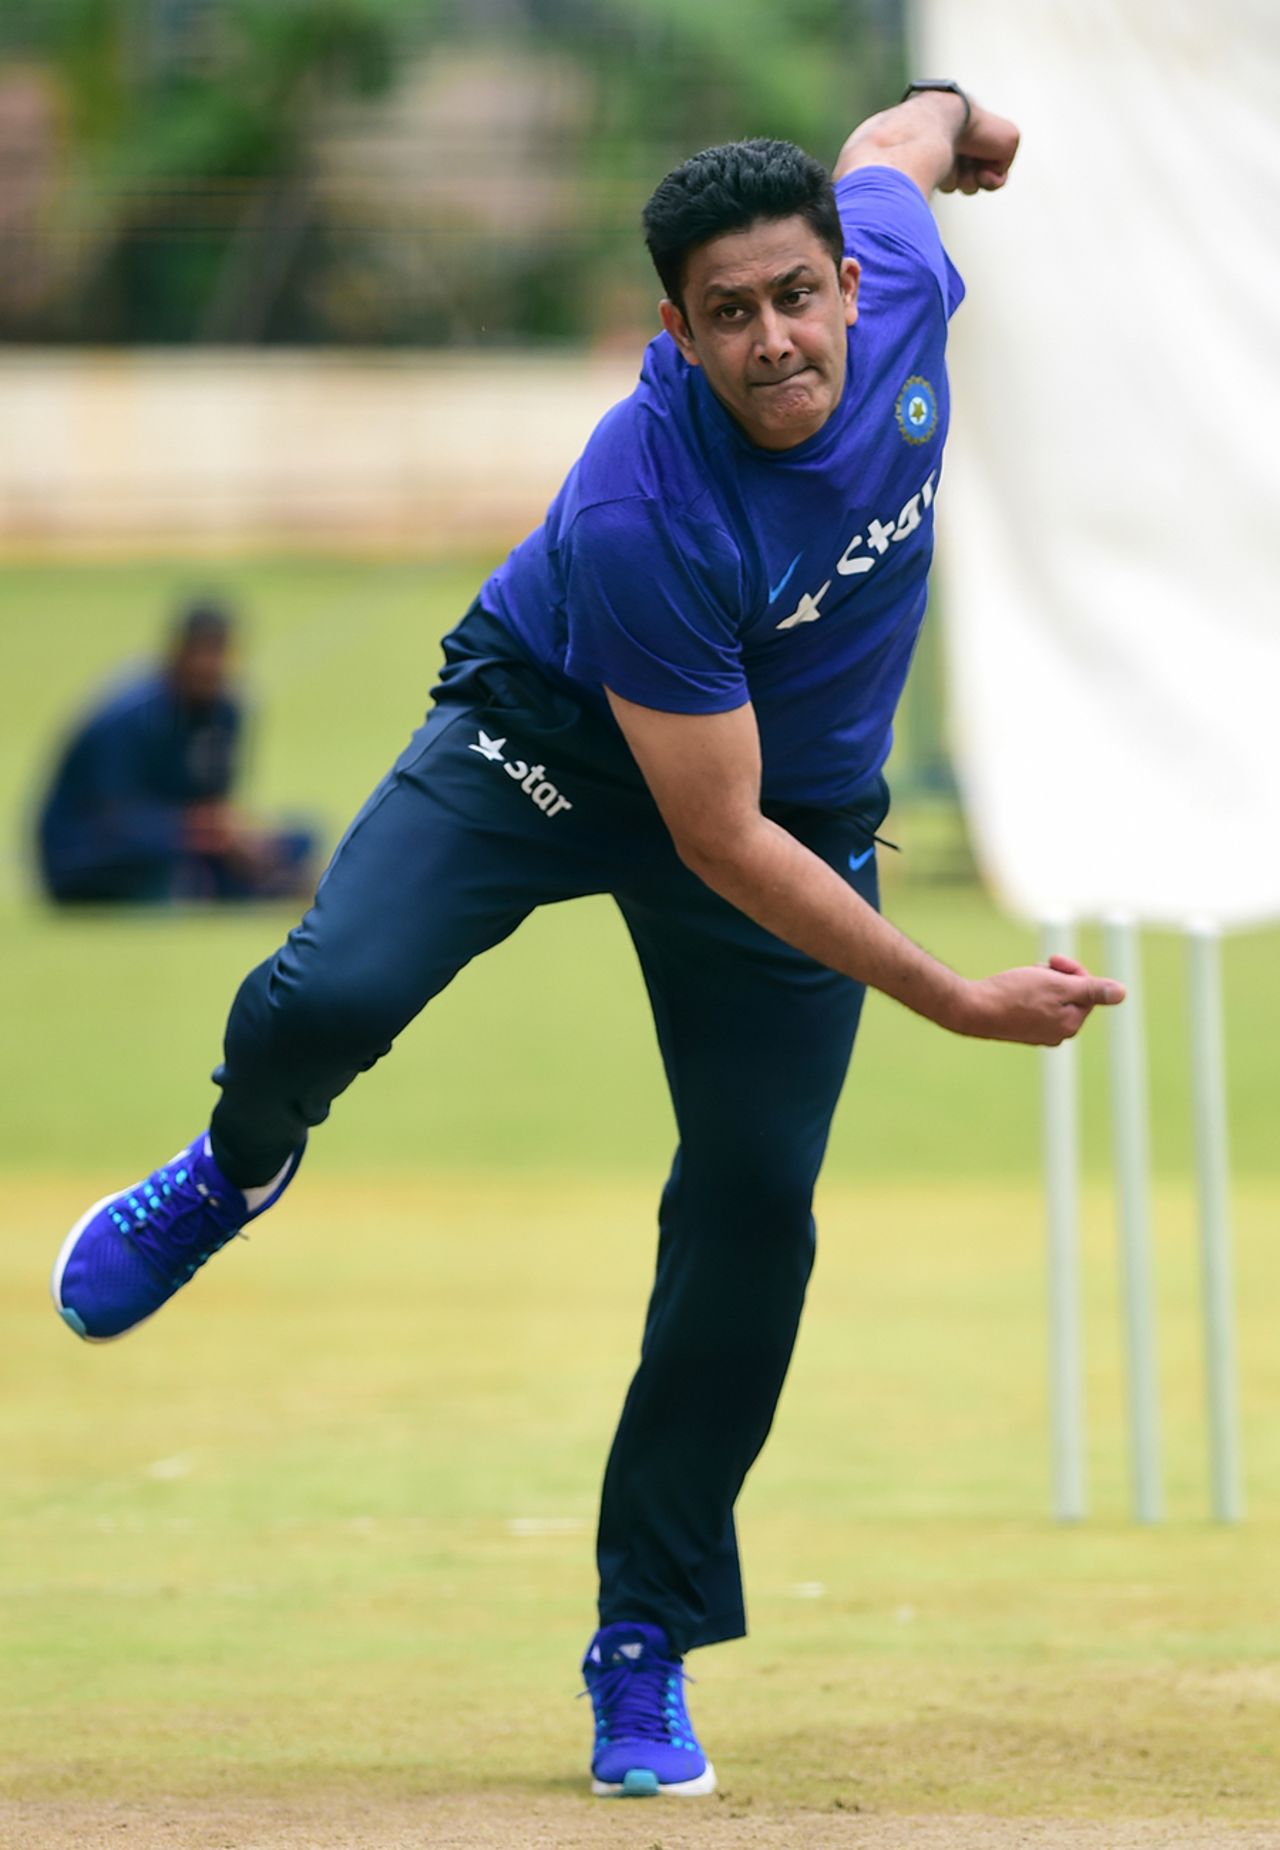 India's new coach Anil Kumble turns his arm over during a training session, Bangalore, June 30, 2016